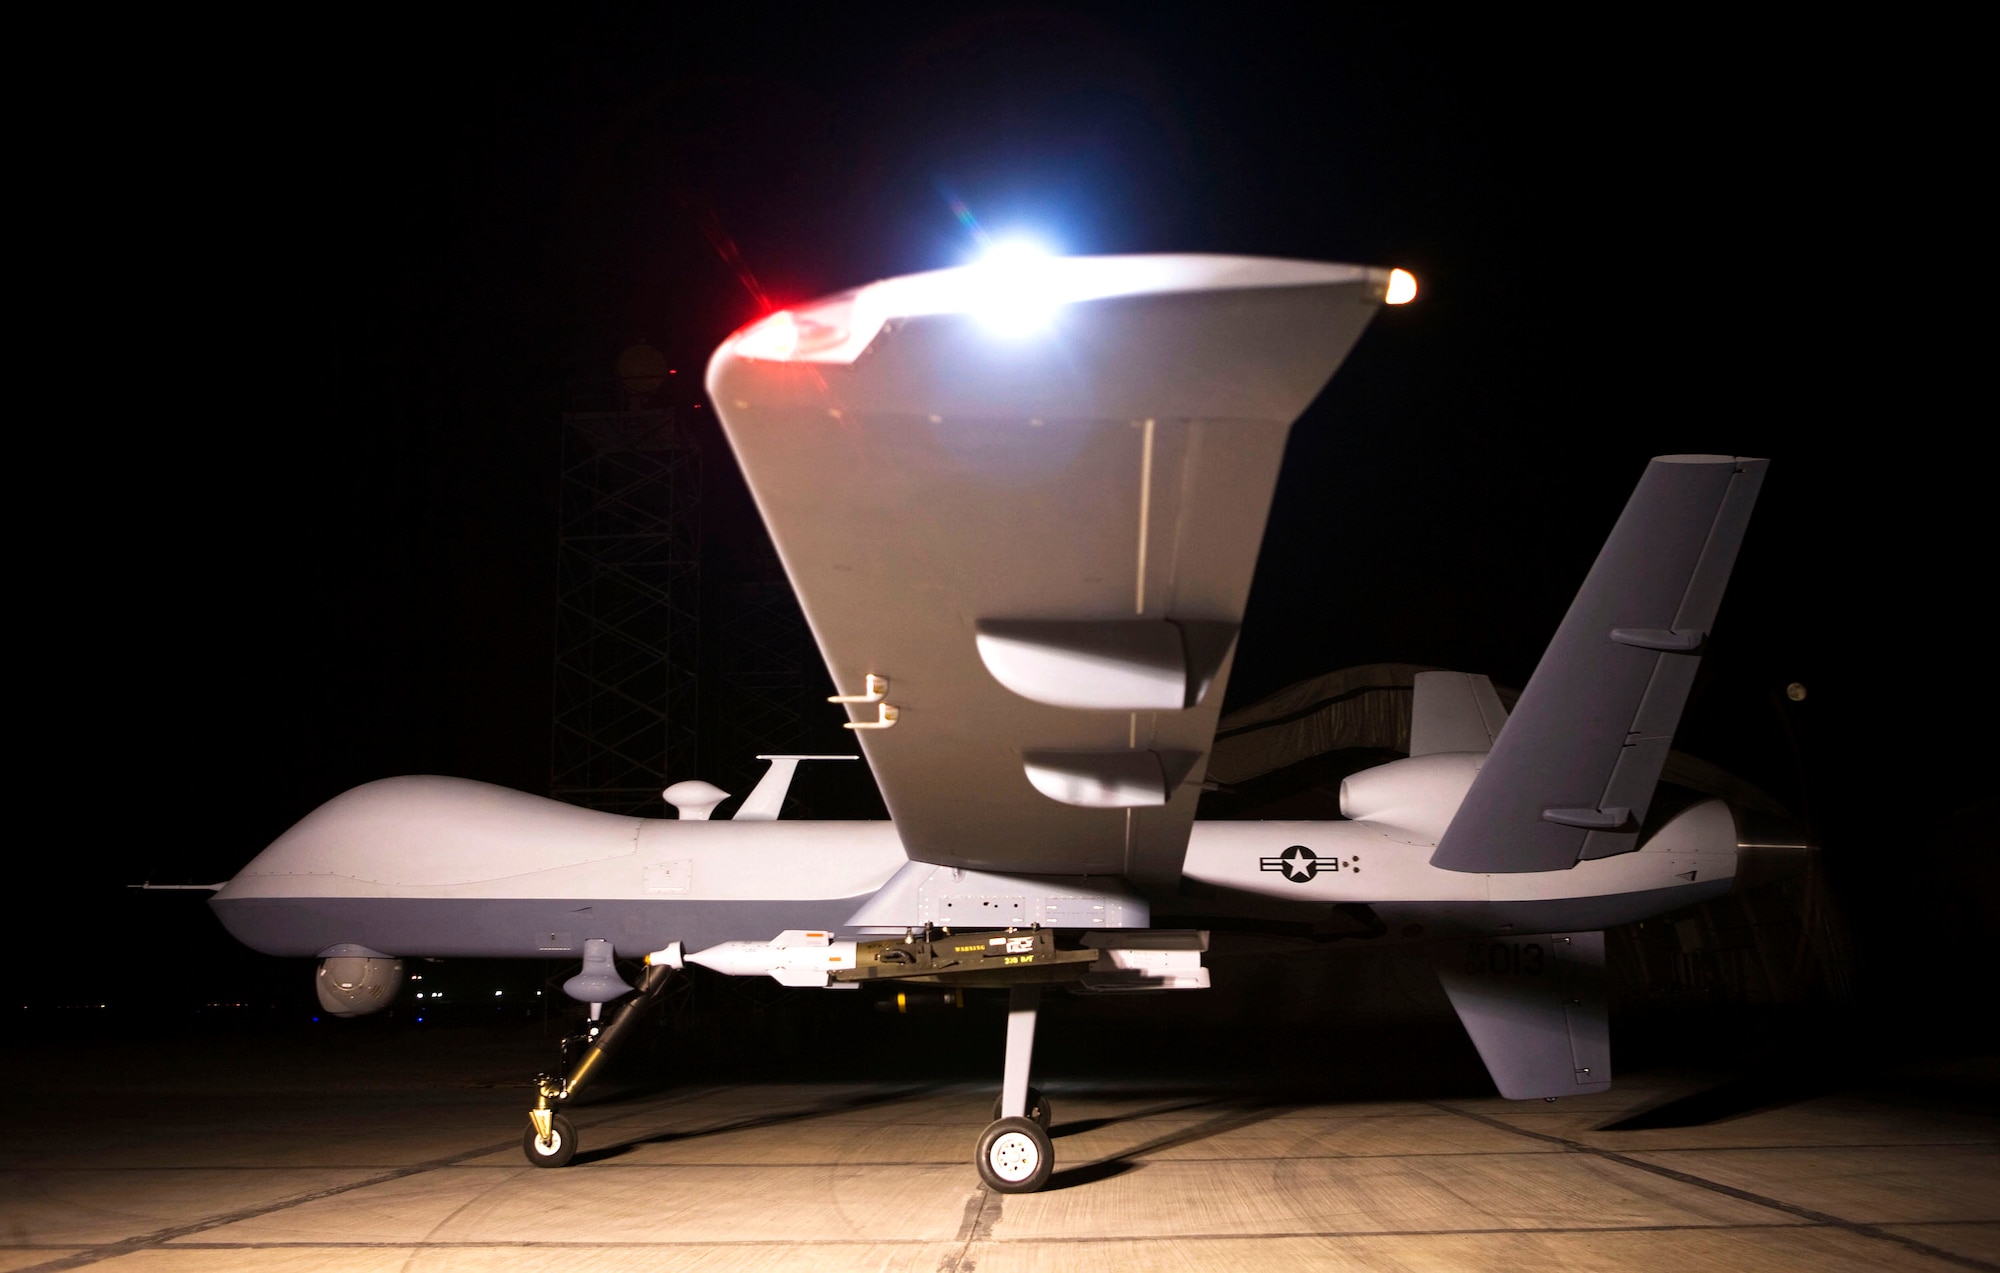 An MQ-9 Reaper sits on a ramp in Afghanistan Oct. 1. The Reaper is launched, recovered and maintained at deployed locations, while being remotely operated by pilots and sensor operators at Creech Air Force Base, Nev.  (Courtesy photo)